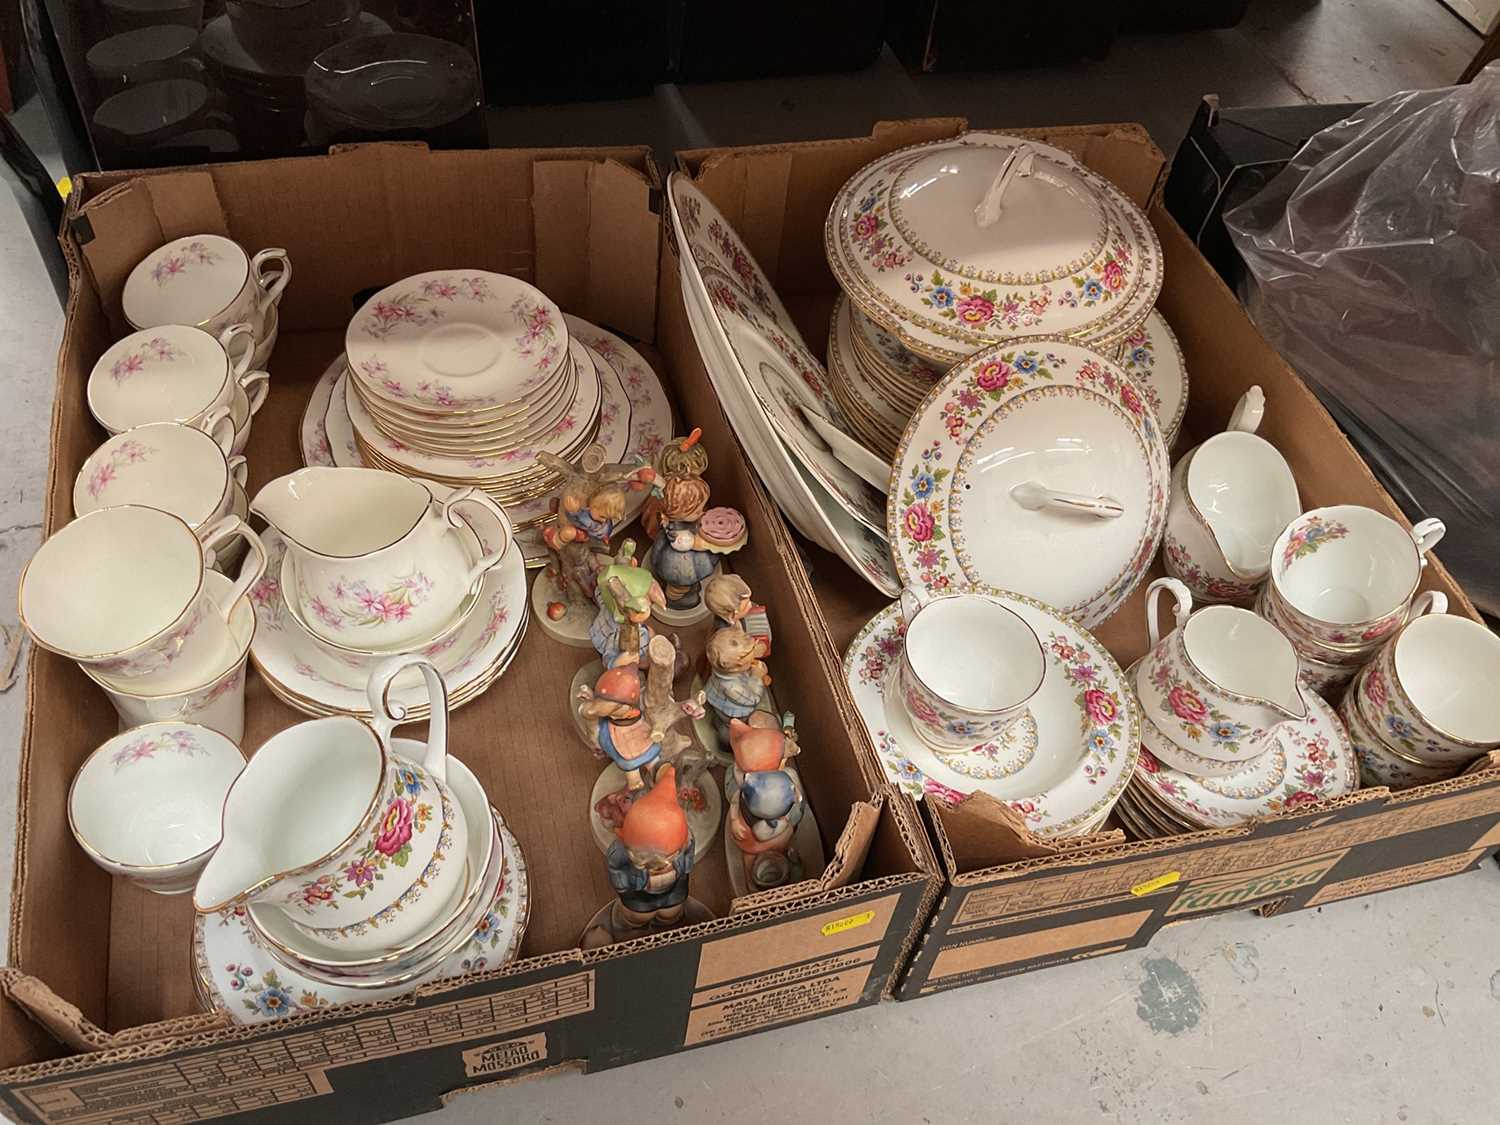 Lot 414 - Royal Grafton 'Malvern' pattern dinnerware, together with Hummel figures and Duchess teaware (2 boxes)